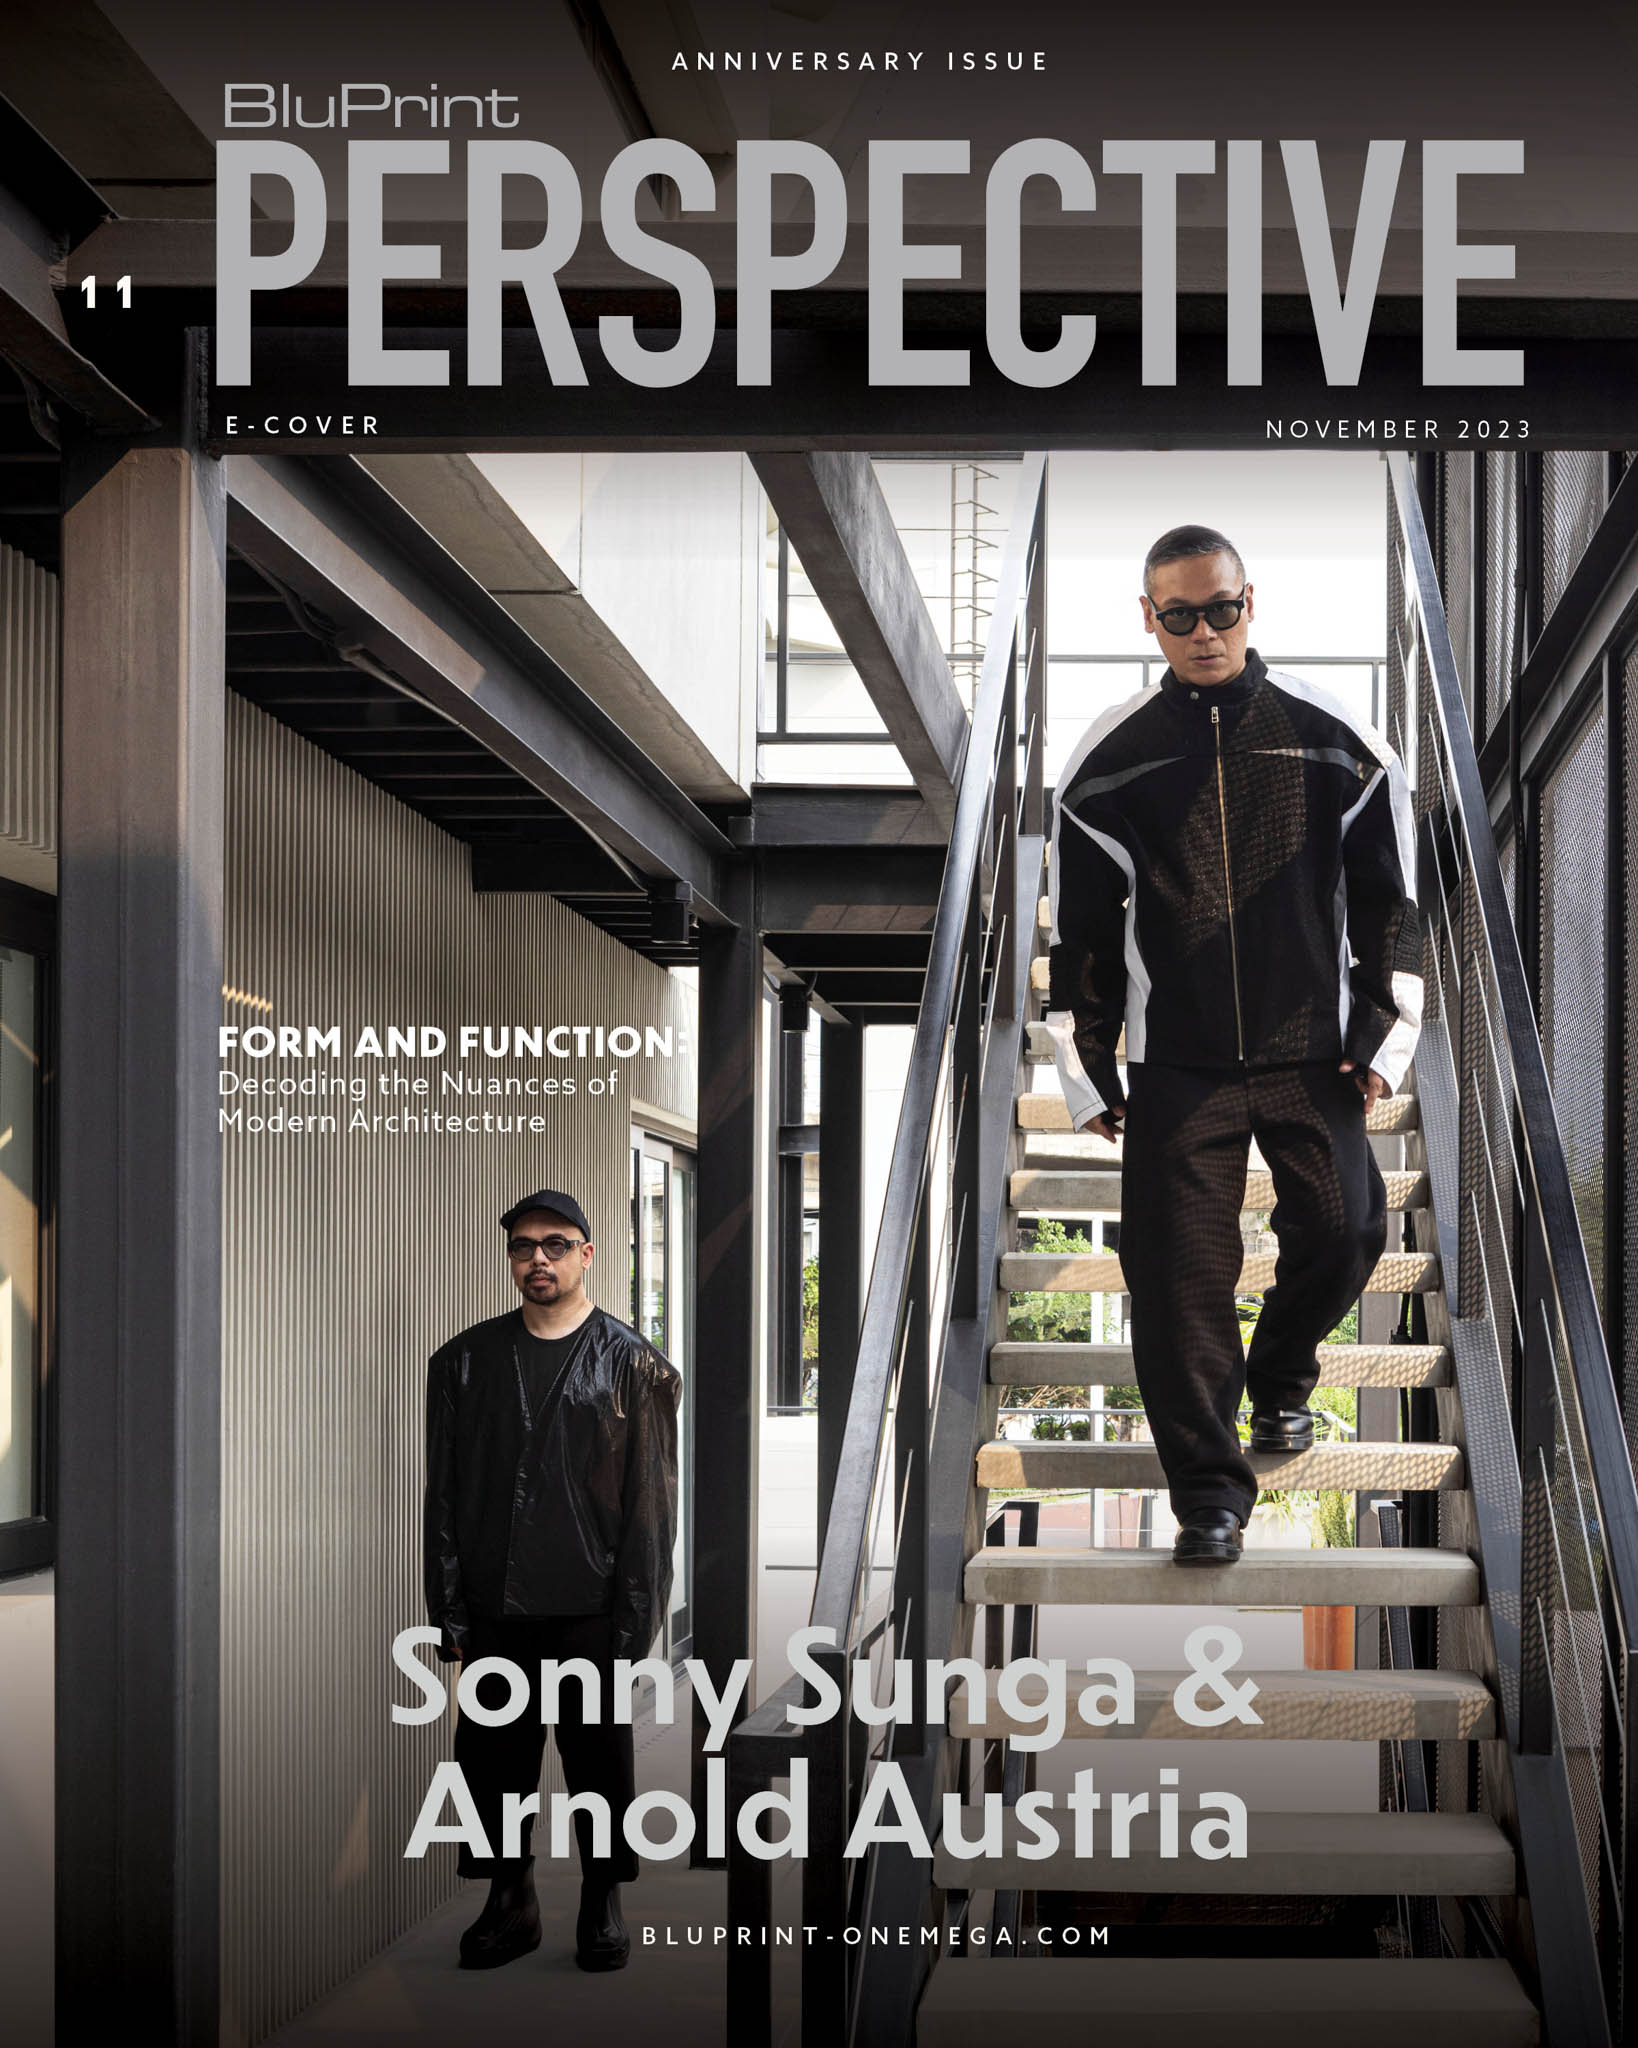 BluPrint Perspective November Cover with Arnold Austria and Sonny Sunga